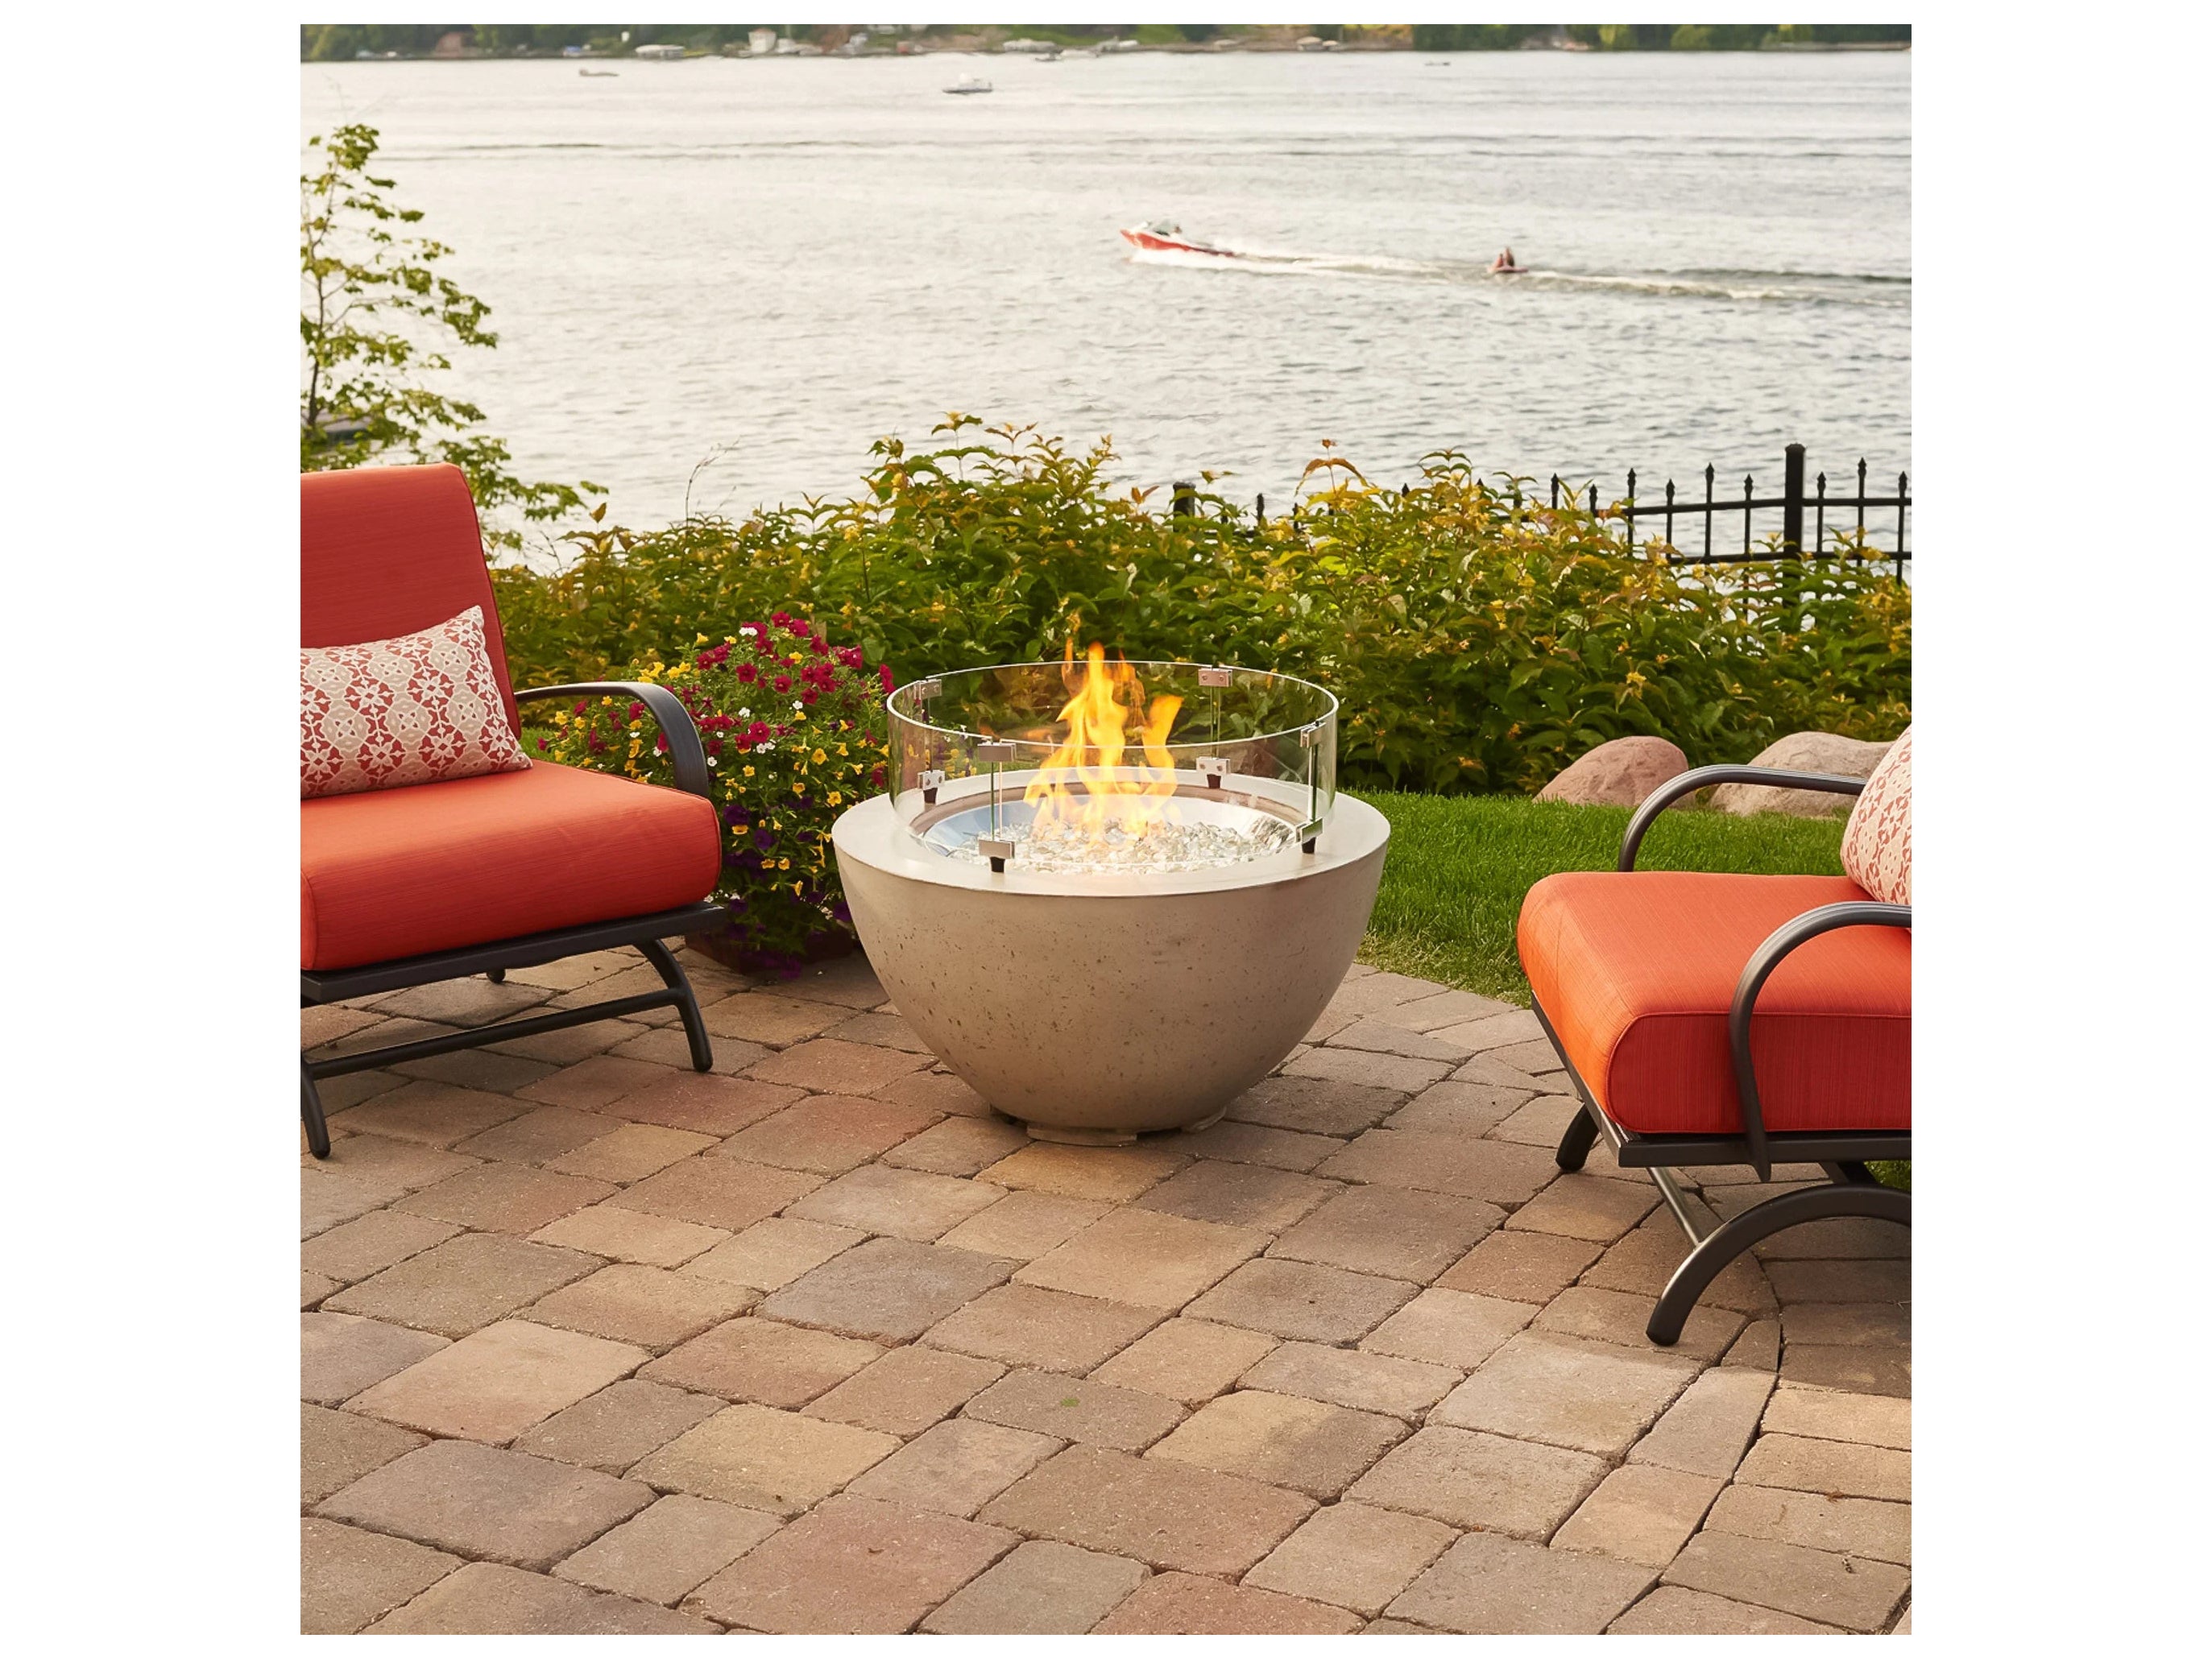 Outdoor Greatroom - Cove Super Cast Concrete Natural Grey 29'' Wide Round Gas Fire Pit Bowl with Direct Spark Ignition